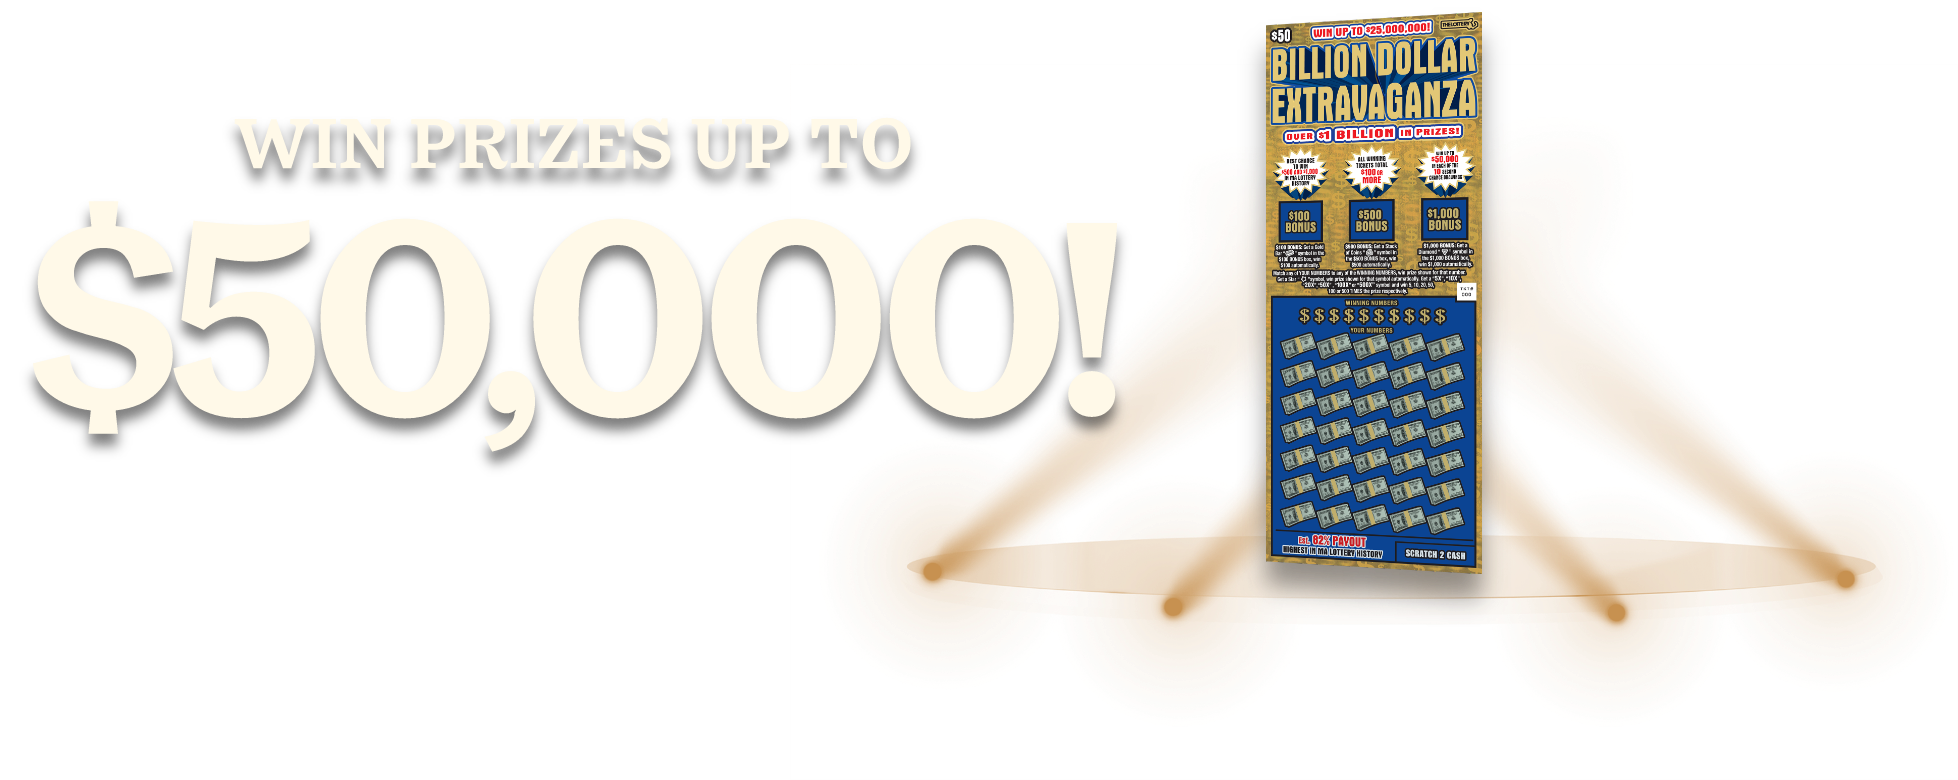 Win up to $50,000